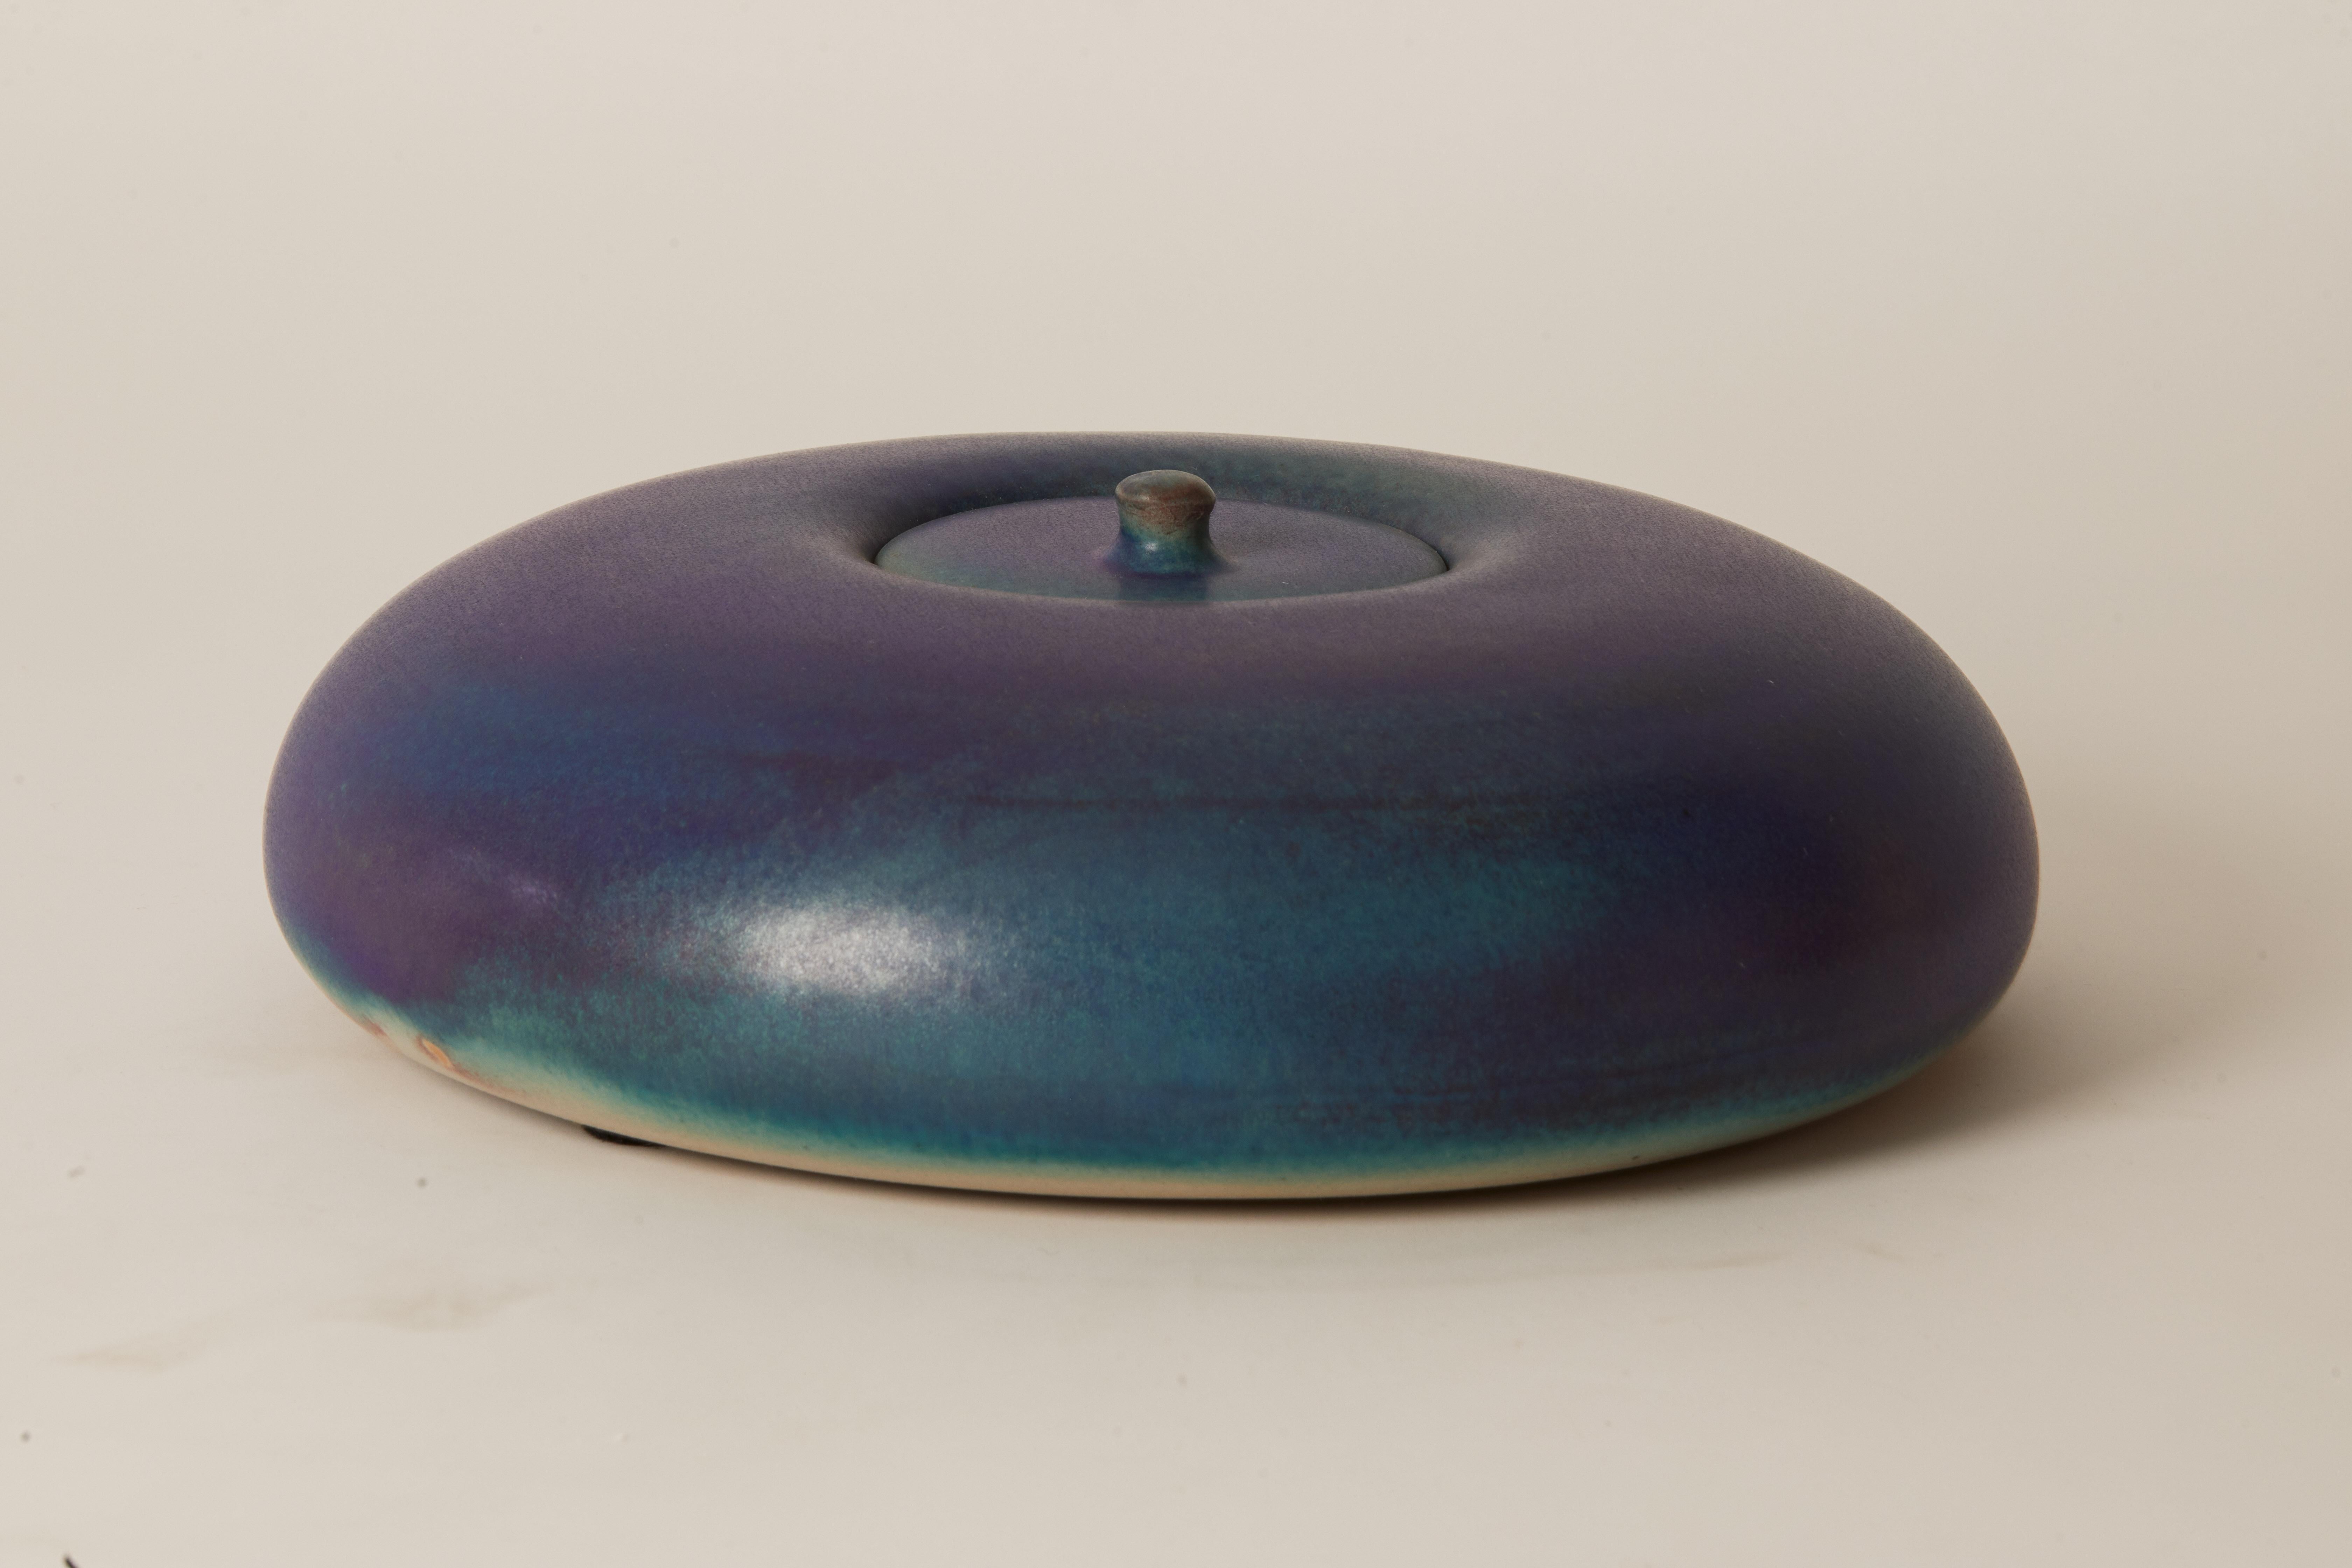 Contemporary French purple and blue rounded lidded cache pot. Signed at the base.